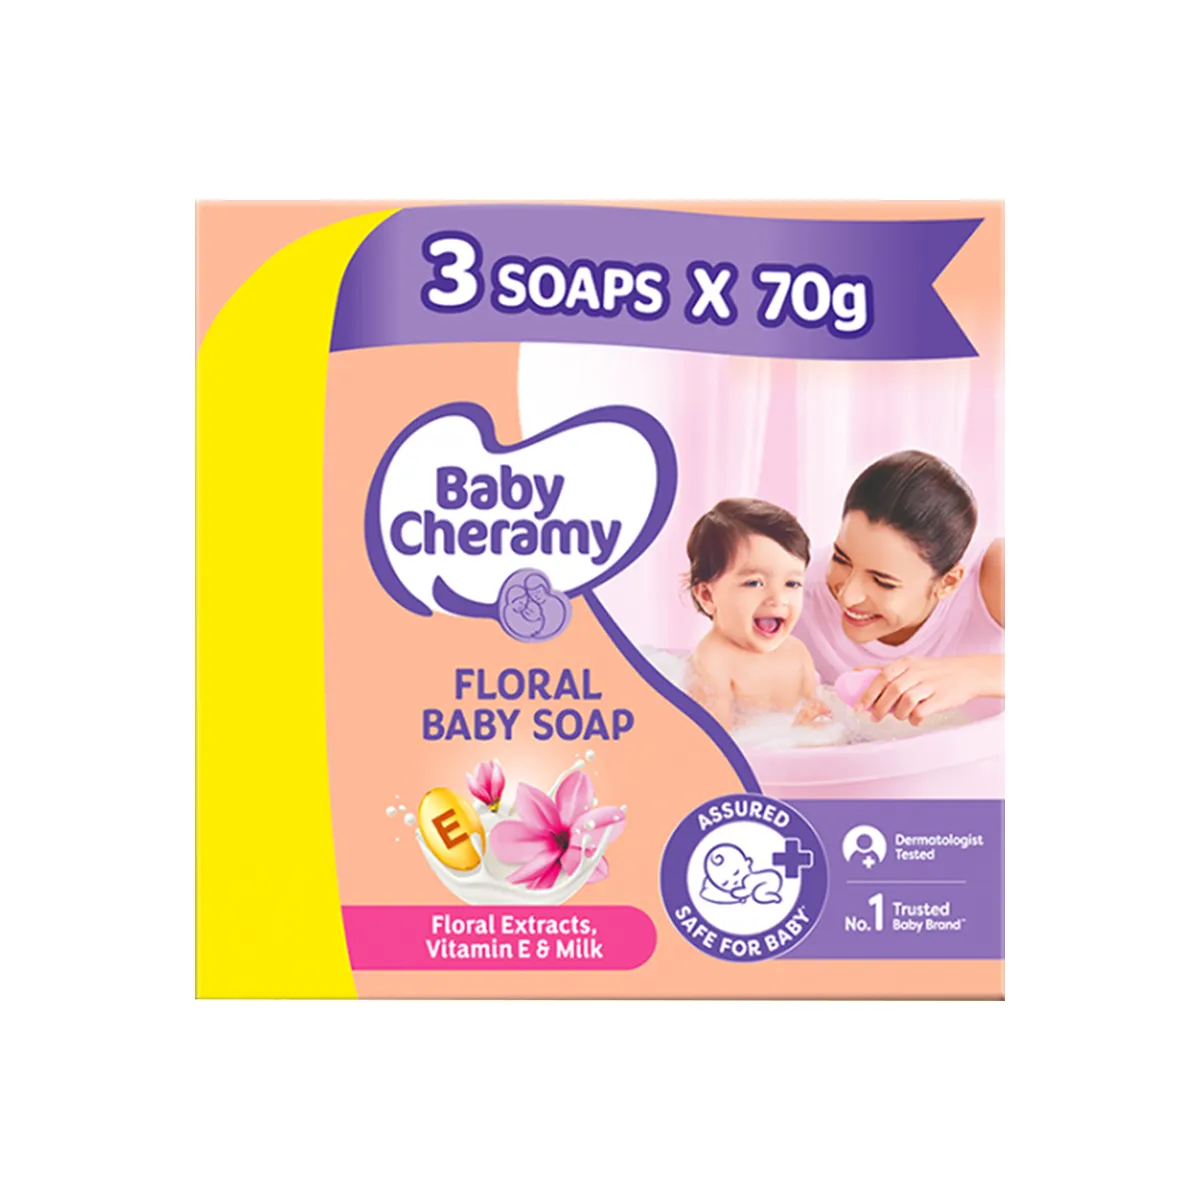 Baby Cheramy Floral Soap 210g Value Pack (3x70g)